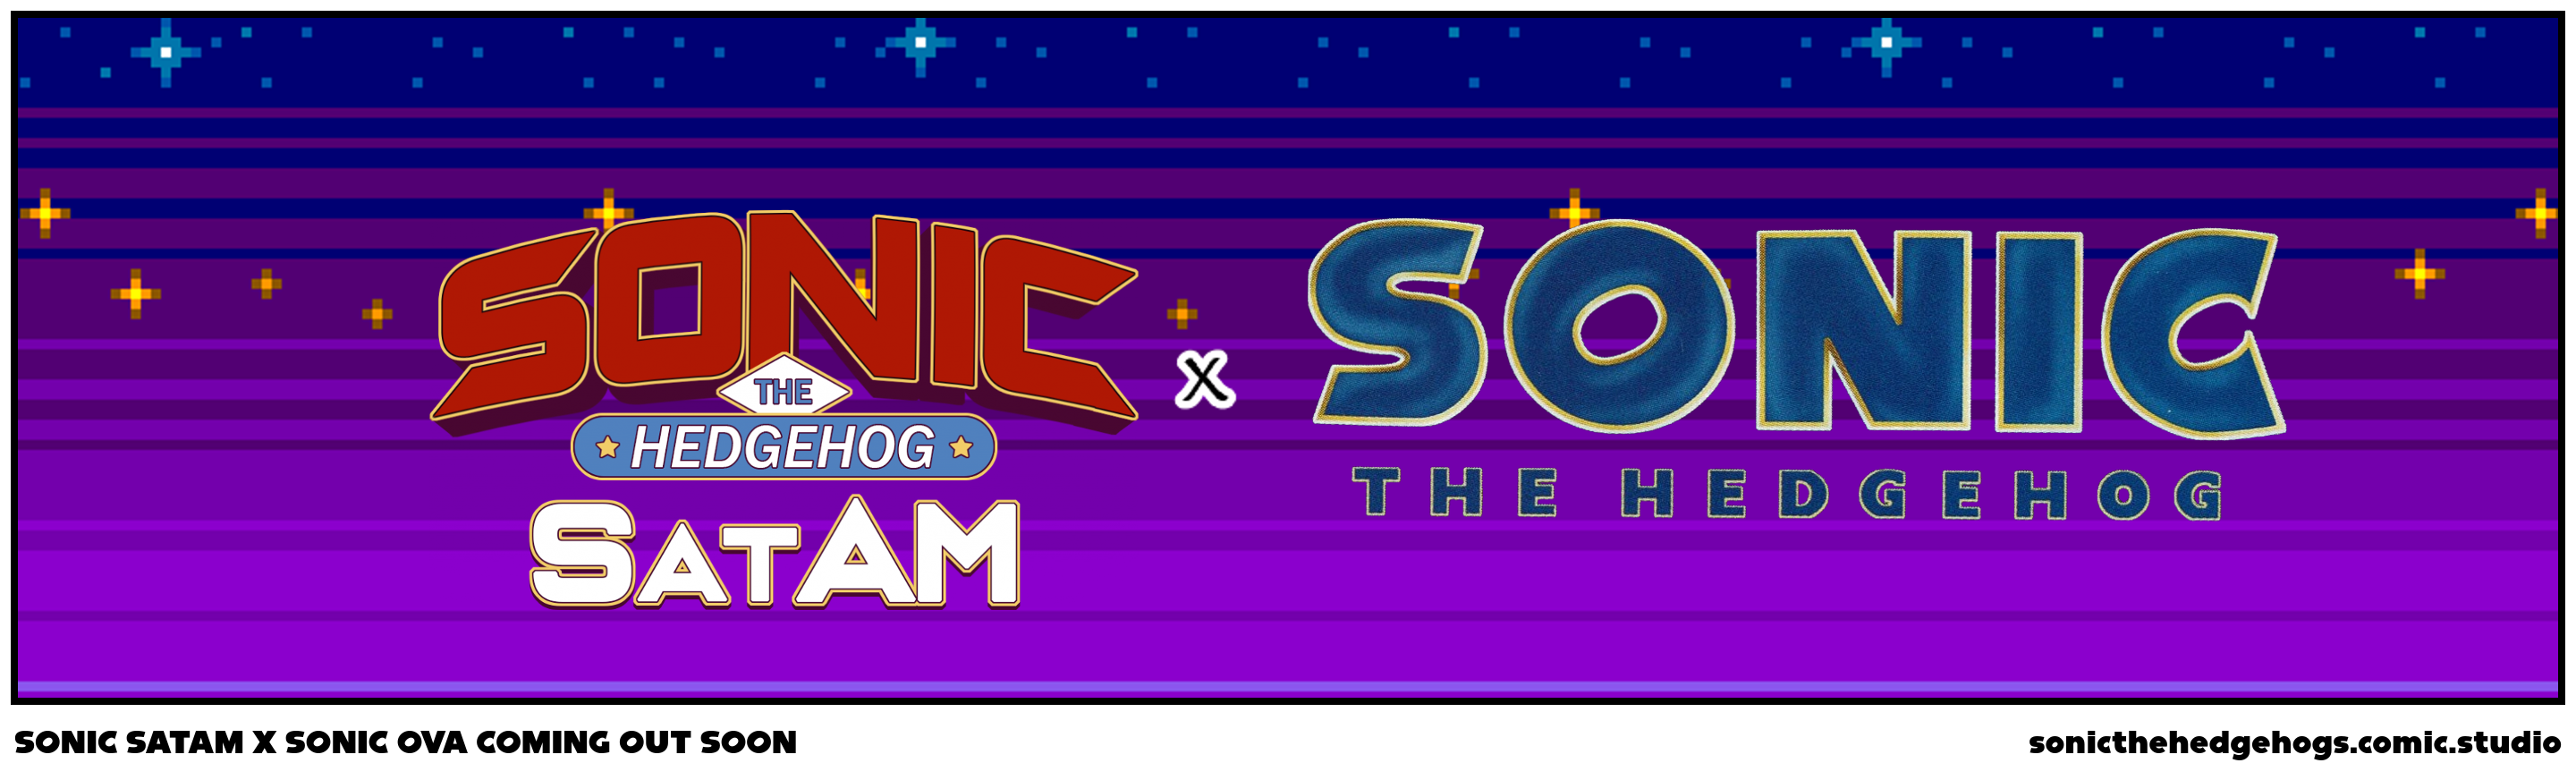 SONIC SATAM X SONIC OVA COMING OUT SOON